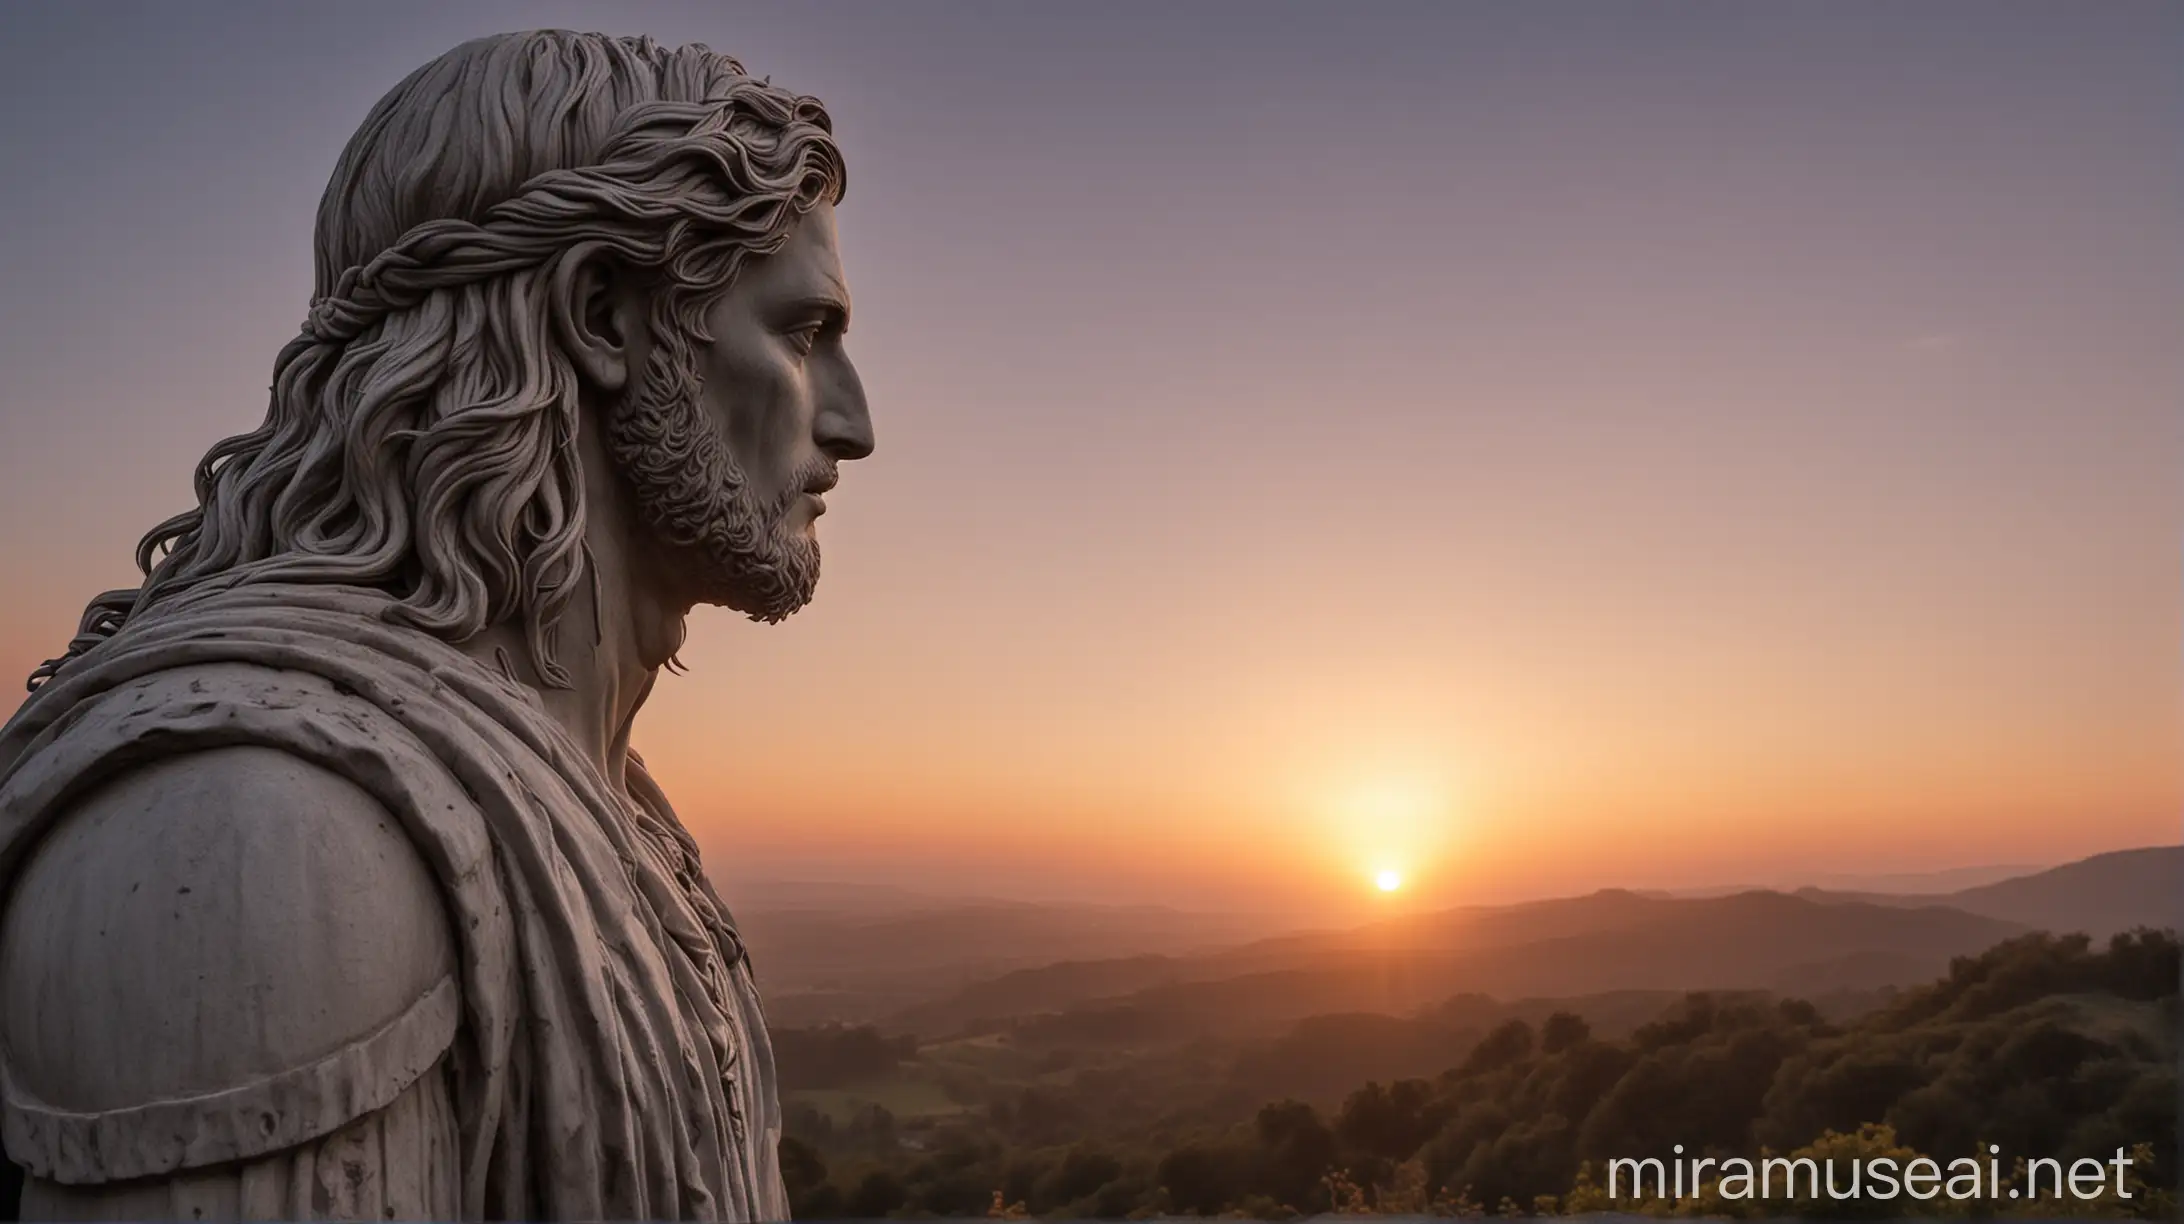 Statue of Stoic Male Looking at Sunrise with Beautiful Nature Surroundings